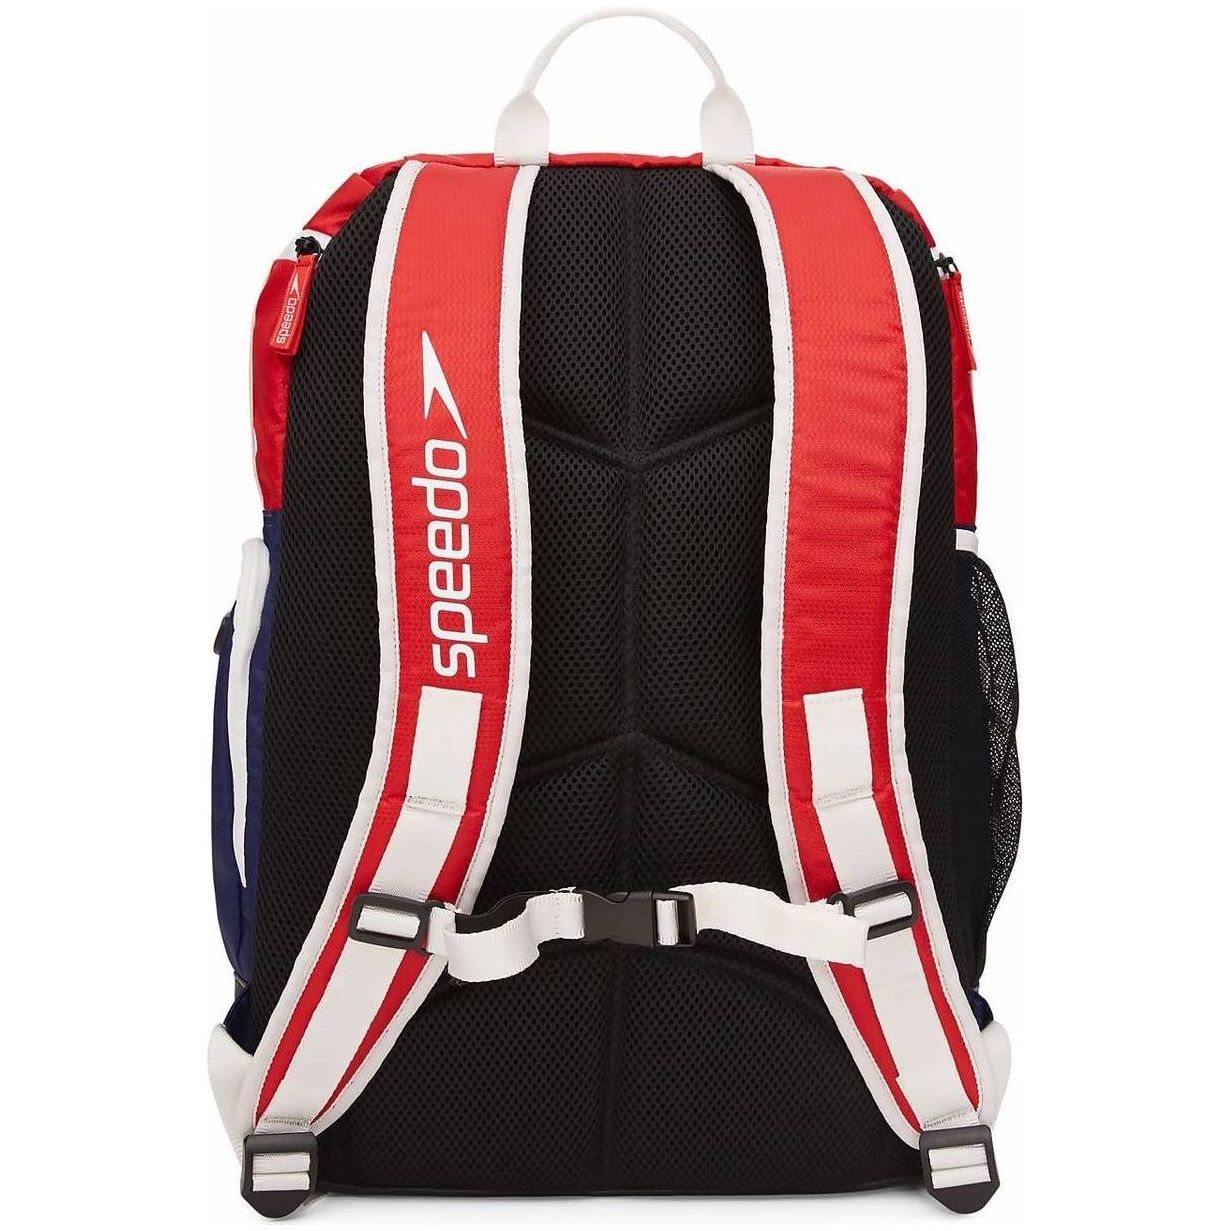 Speedo Teamster 2.0 Backpack (Customized) - Supersonics